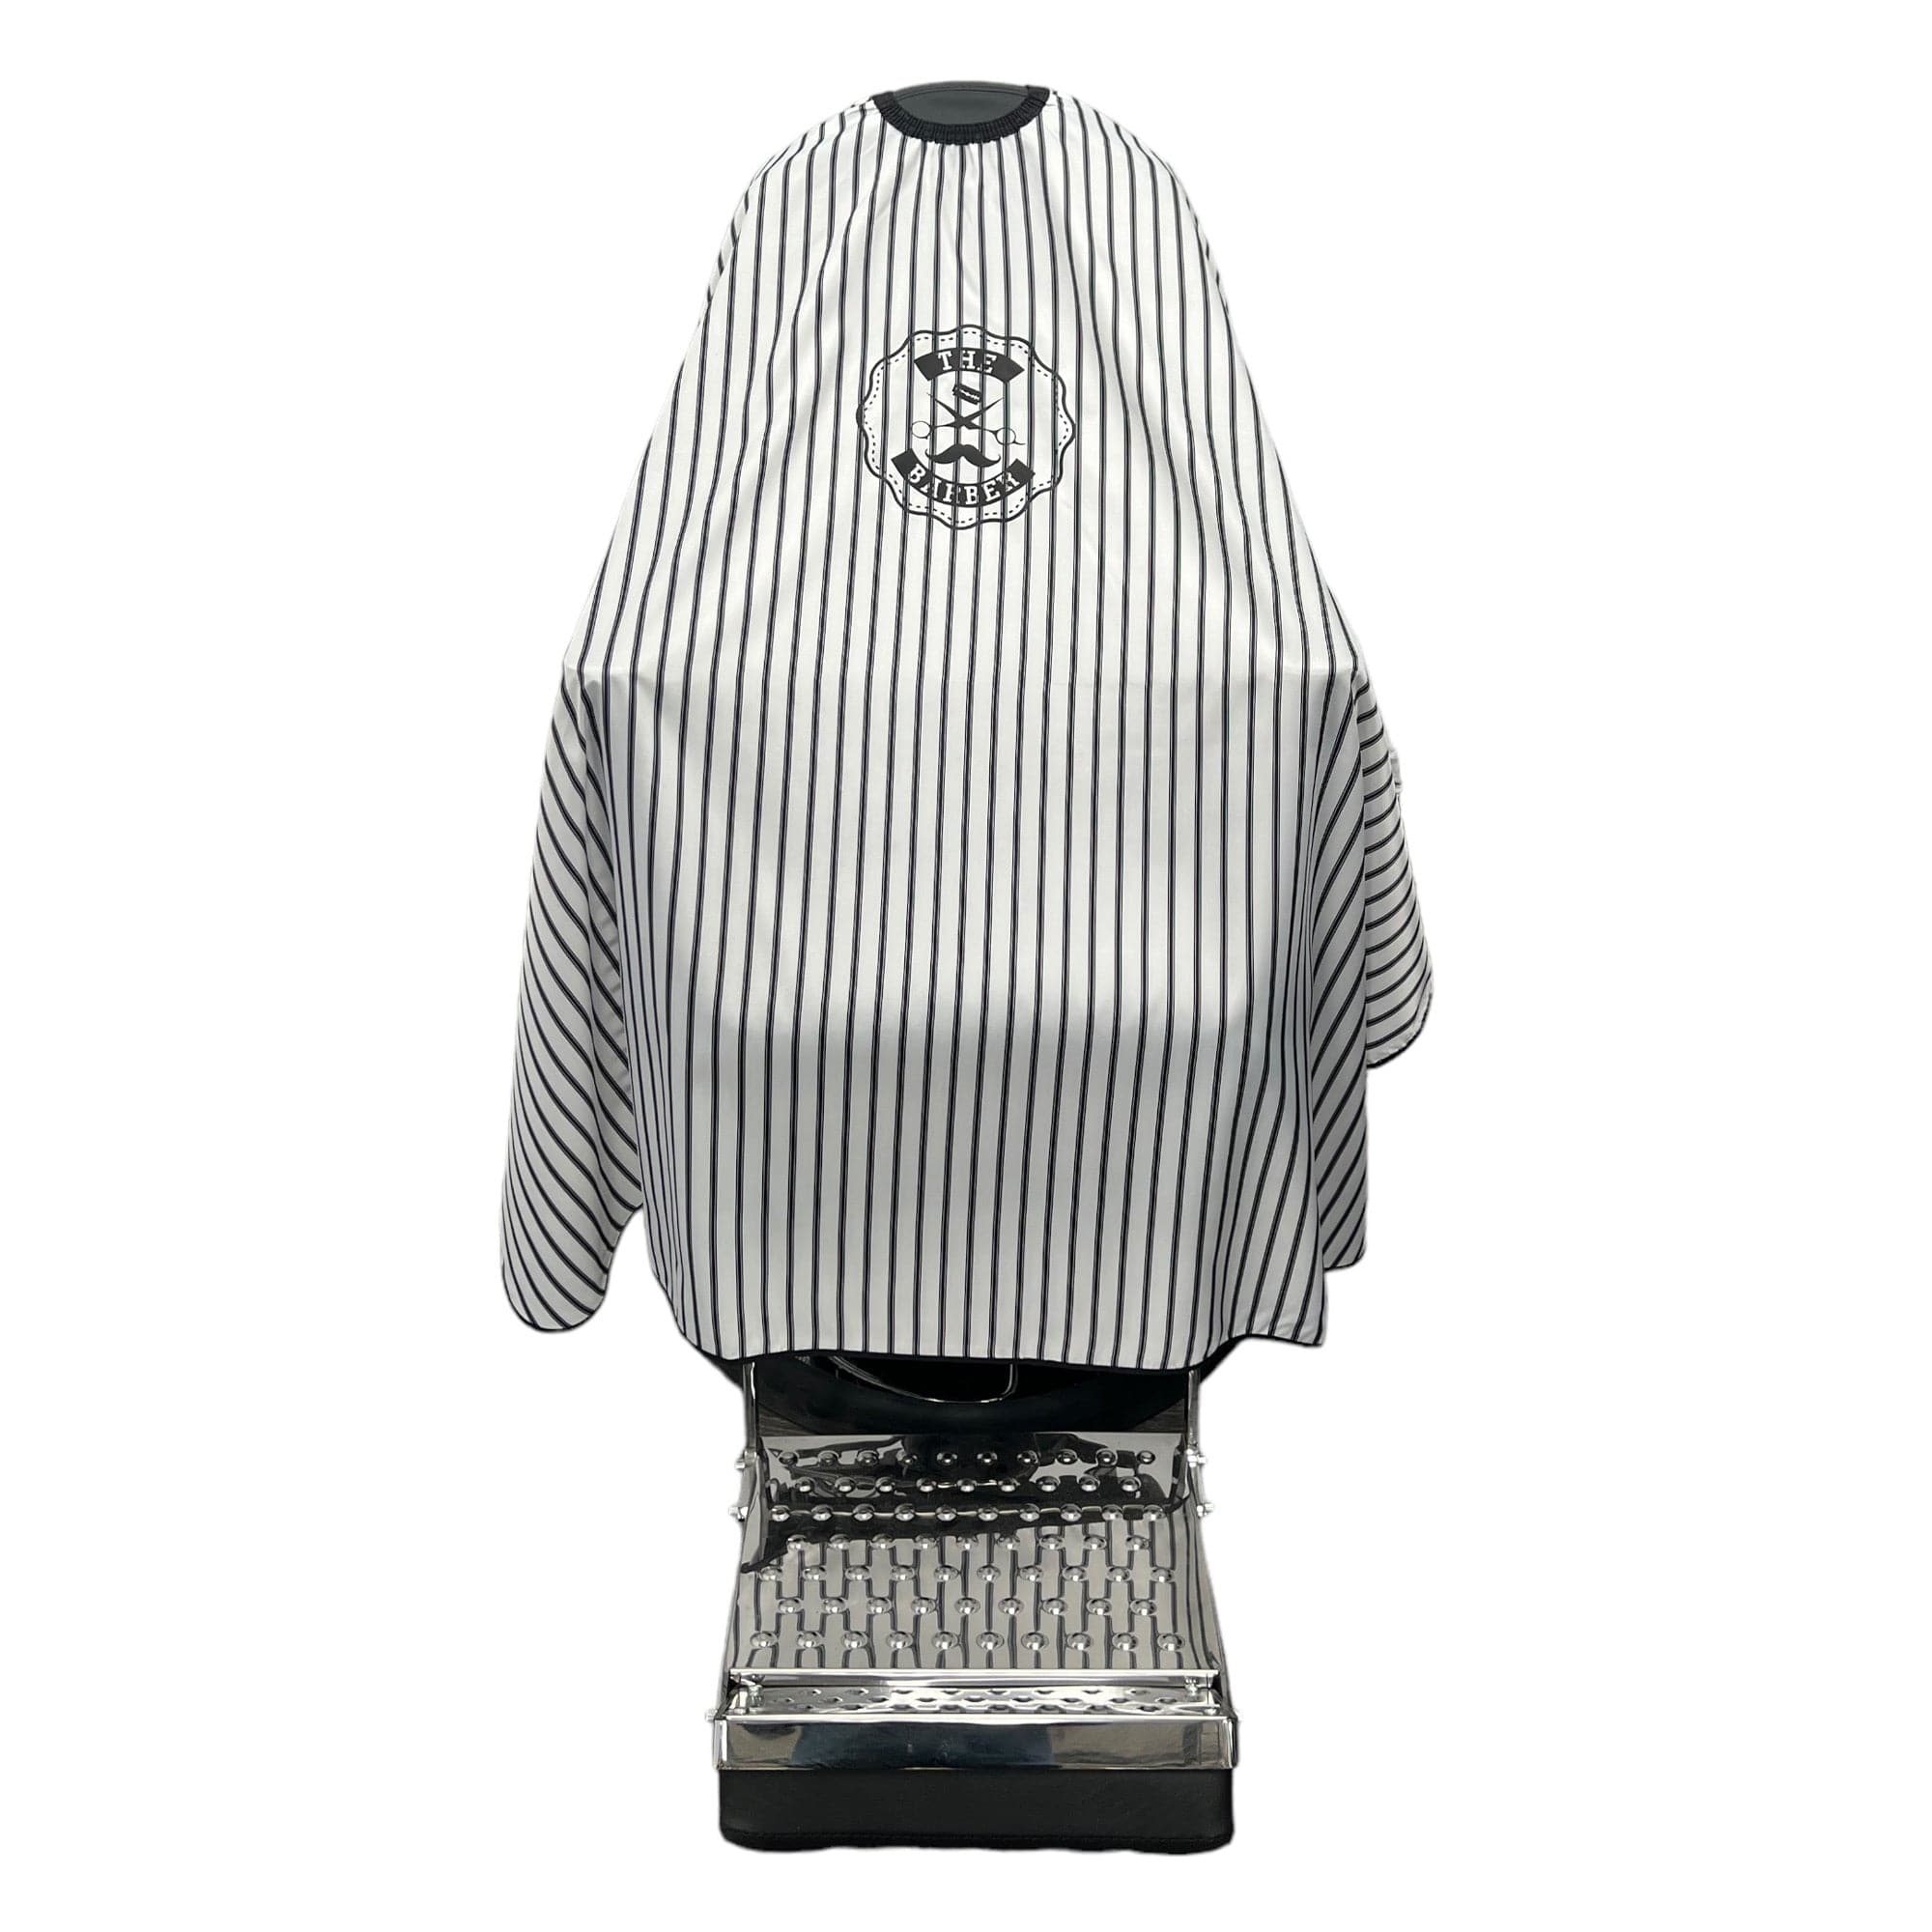 Gabri - Barber Hairdressing Hair Cutting Capes & Gowns Black and White Stripes